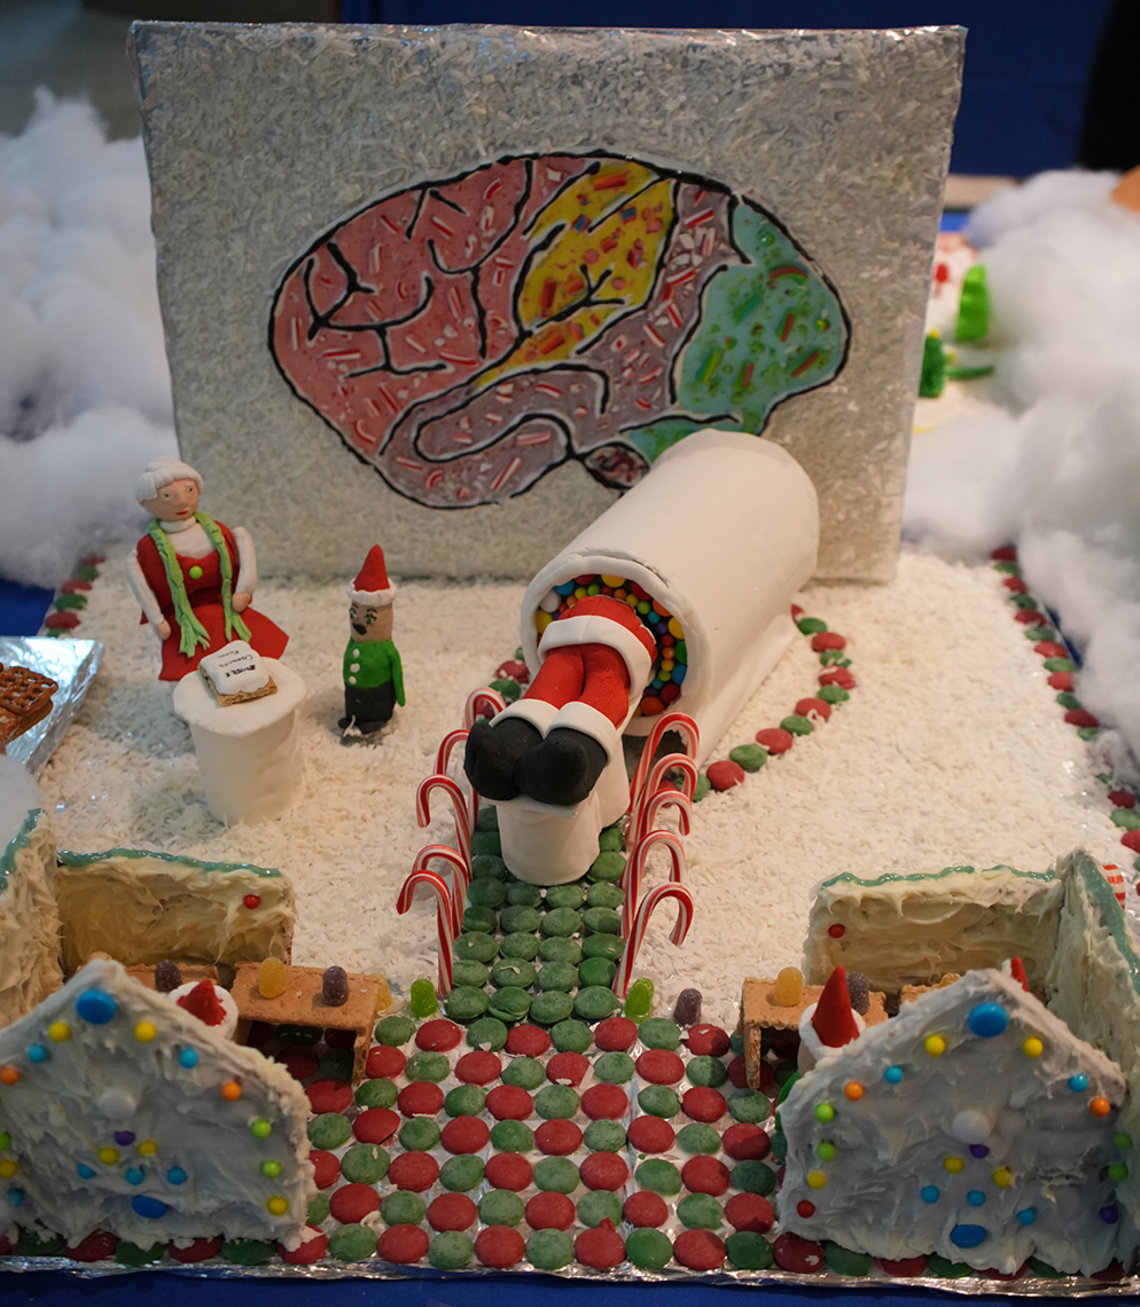 Santas legs stick out from MRI machine, with Mrs. Claus doing intake and a candy brain on display behind